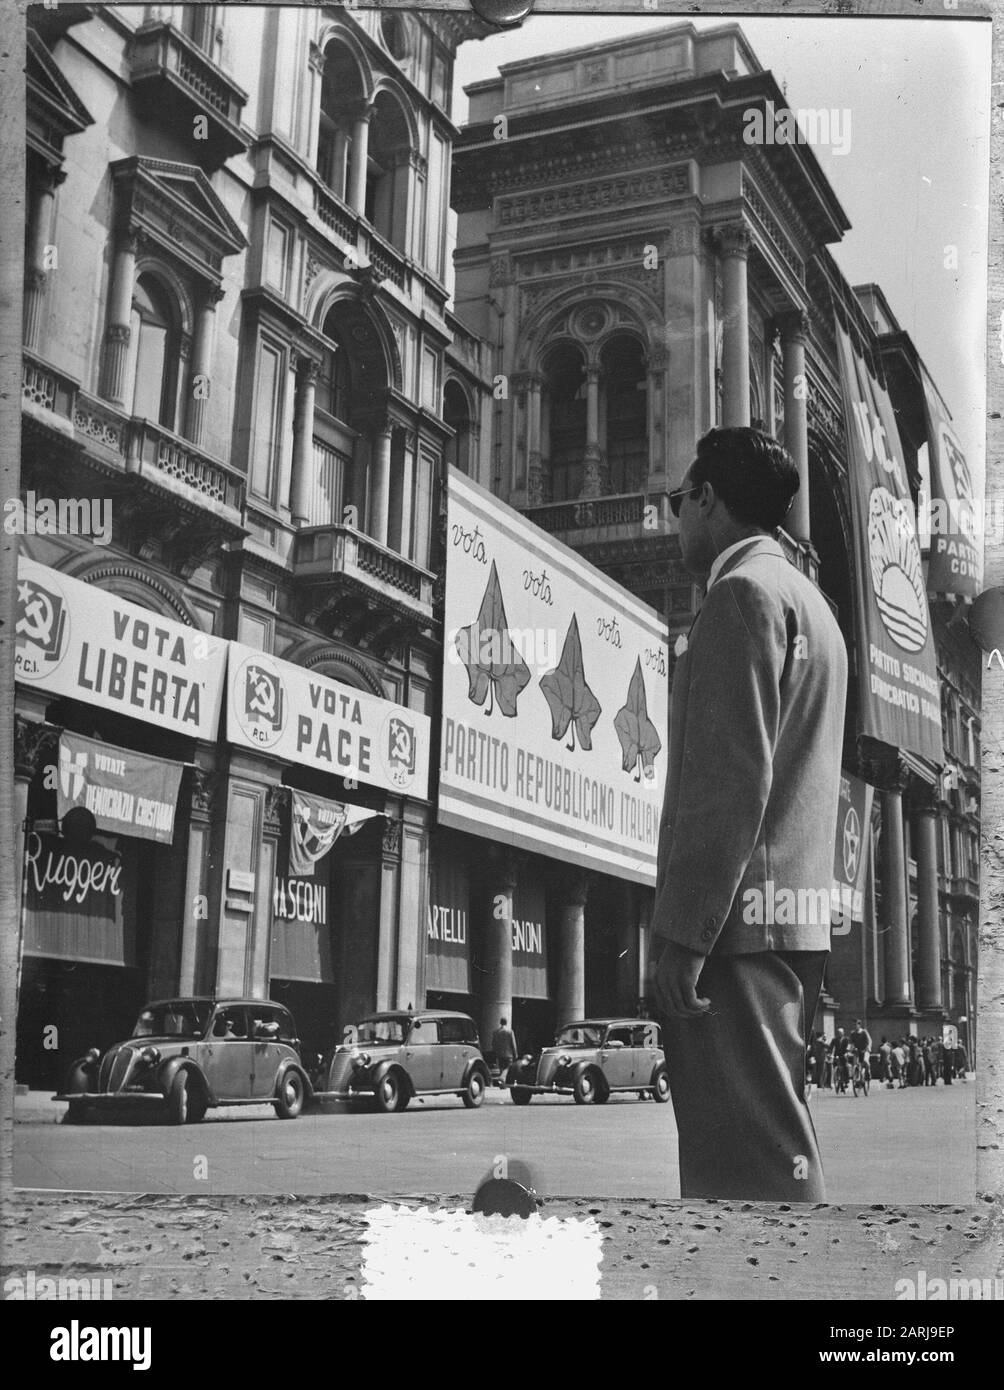 Election fever in Italy for parliamentary elections on June 7, 1953 Annotation: Repronegative Date: May 12, 1953 Location: Italy, Milan Keywords: ELECTIONS Stock Photo